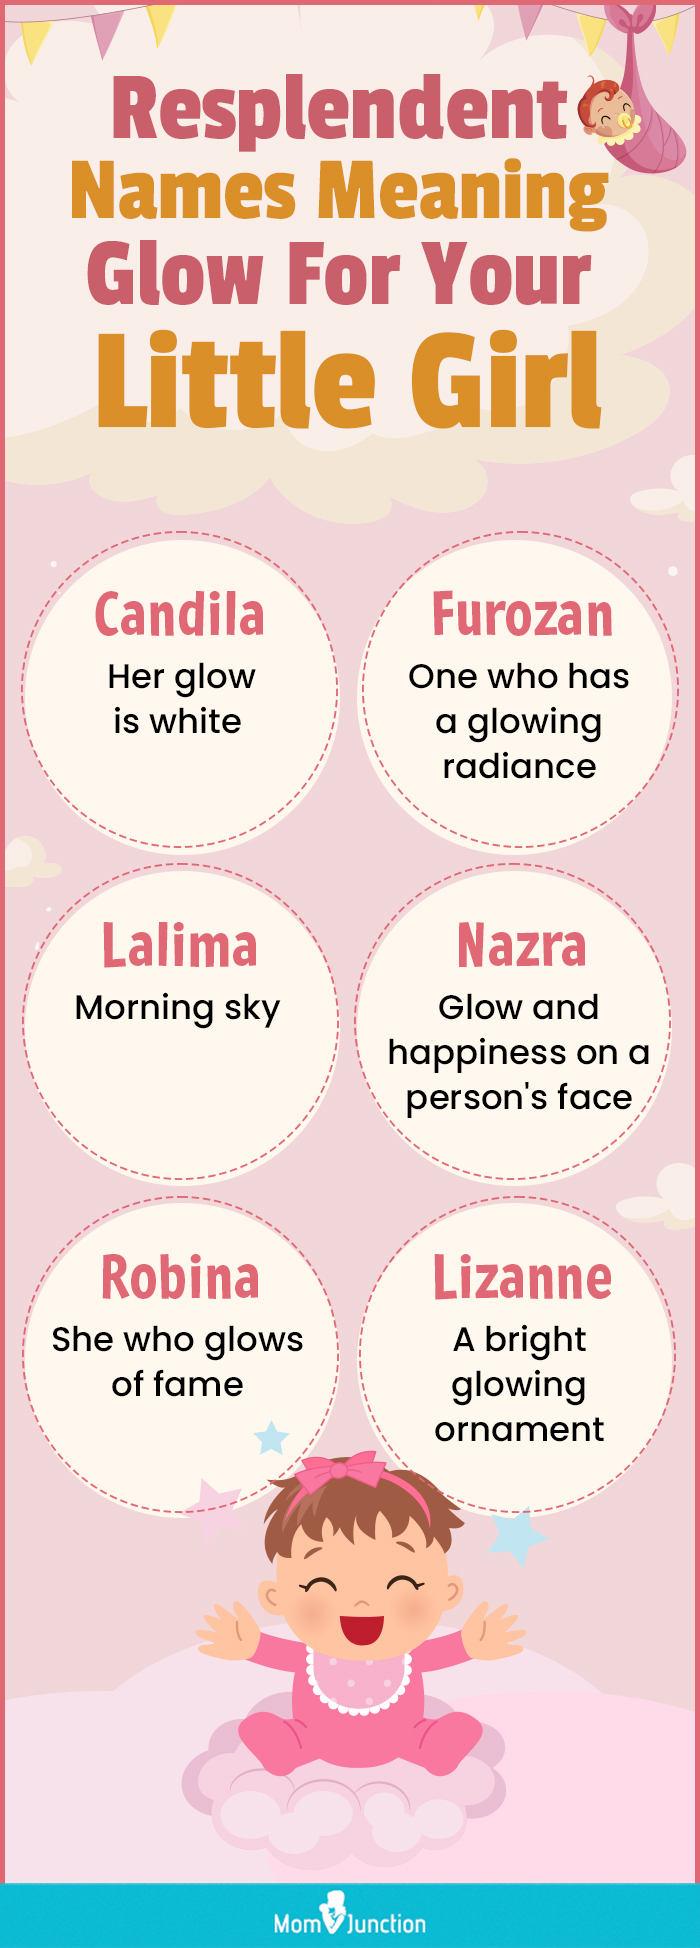 Resplendent Names Meaning Glow For Your Little Girl (infographic)